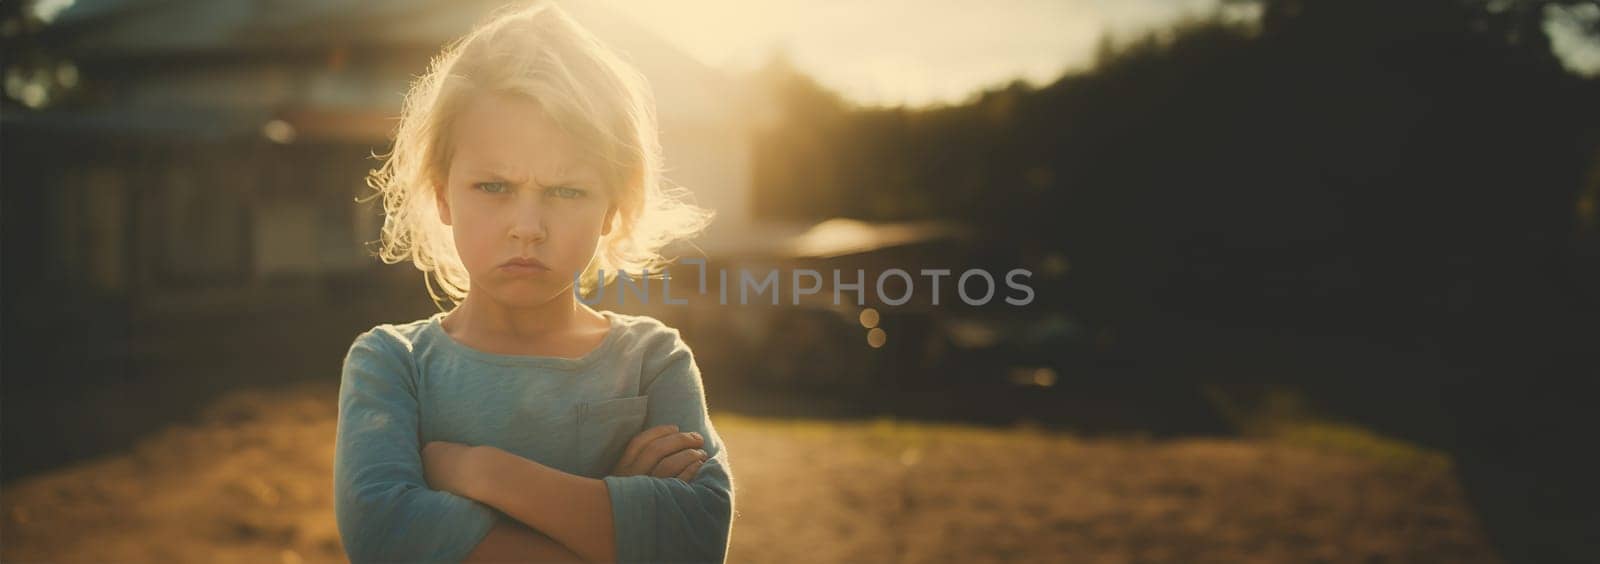 Cute angry child. Attention deficit hyperactivity disorder (ADHD) Concept.Angry boy or girl screaming,upset, sad, negative attitude.Stressed child, Kid with bad behavior stubborn.mental health.Autism kid.Angry child. Copy space Space for text